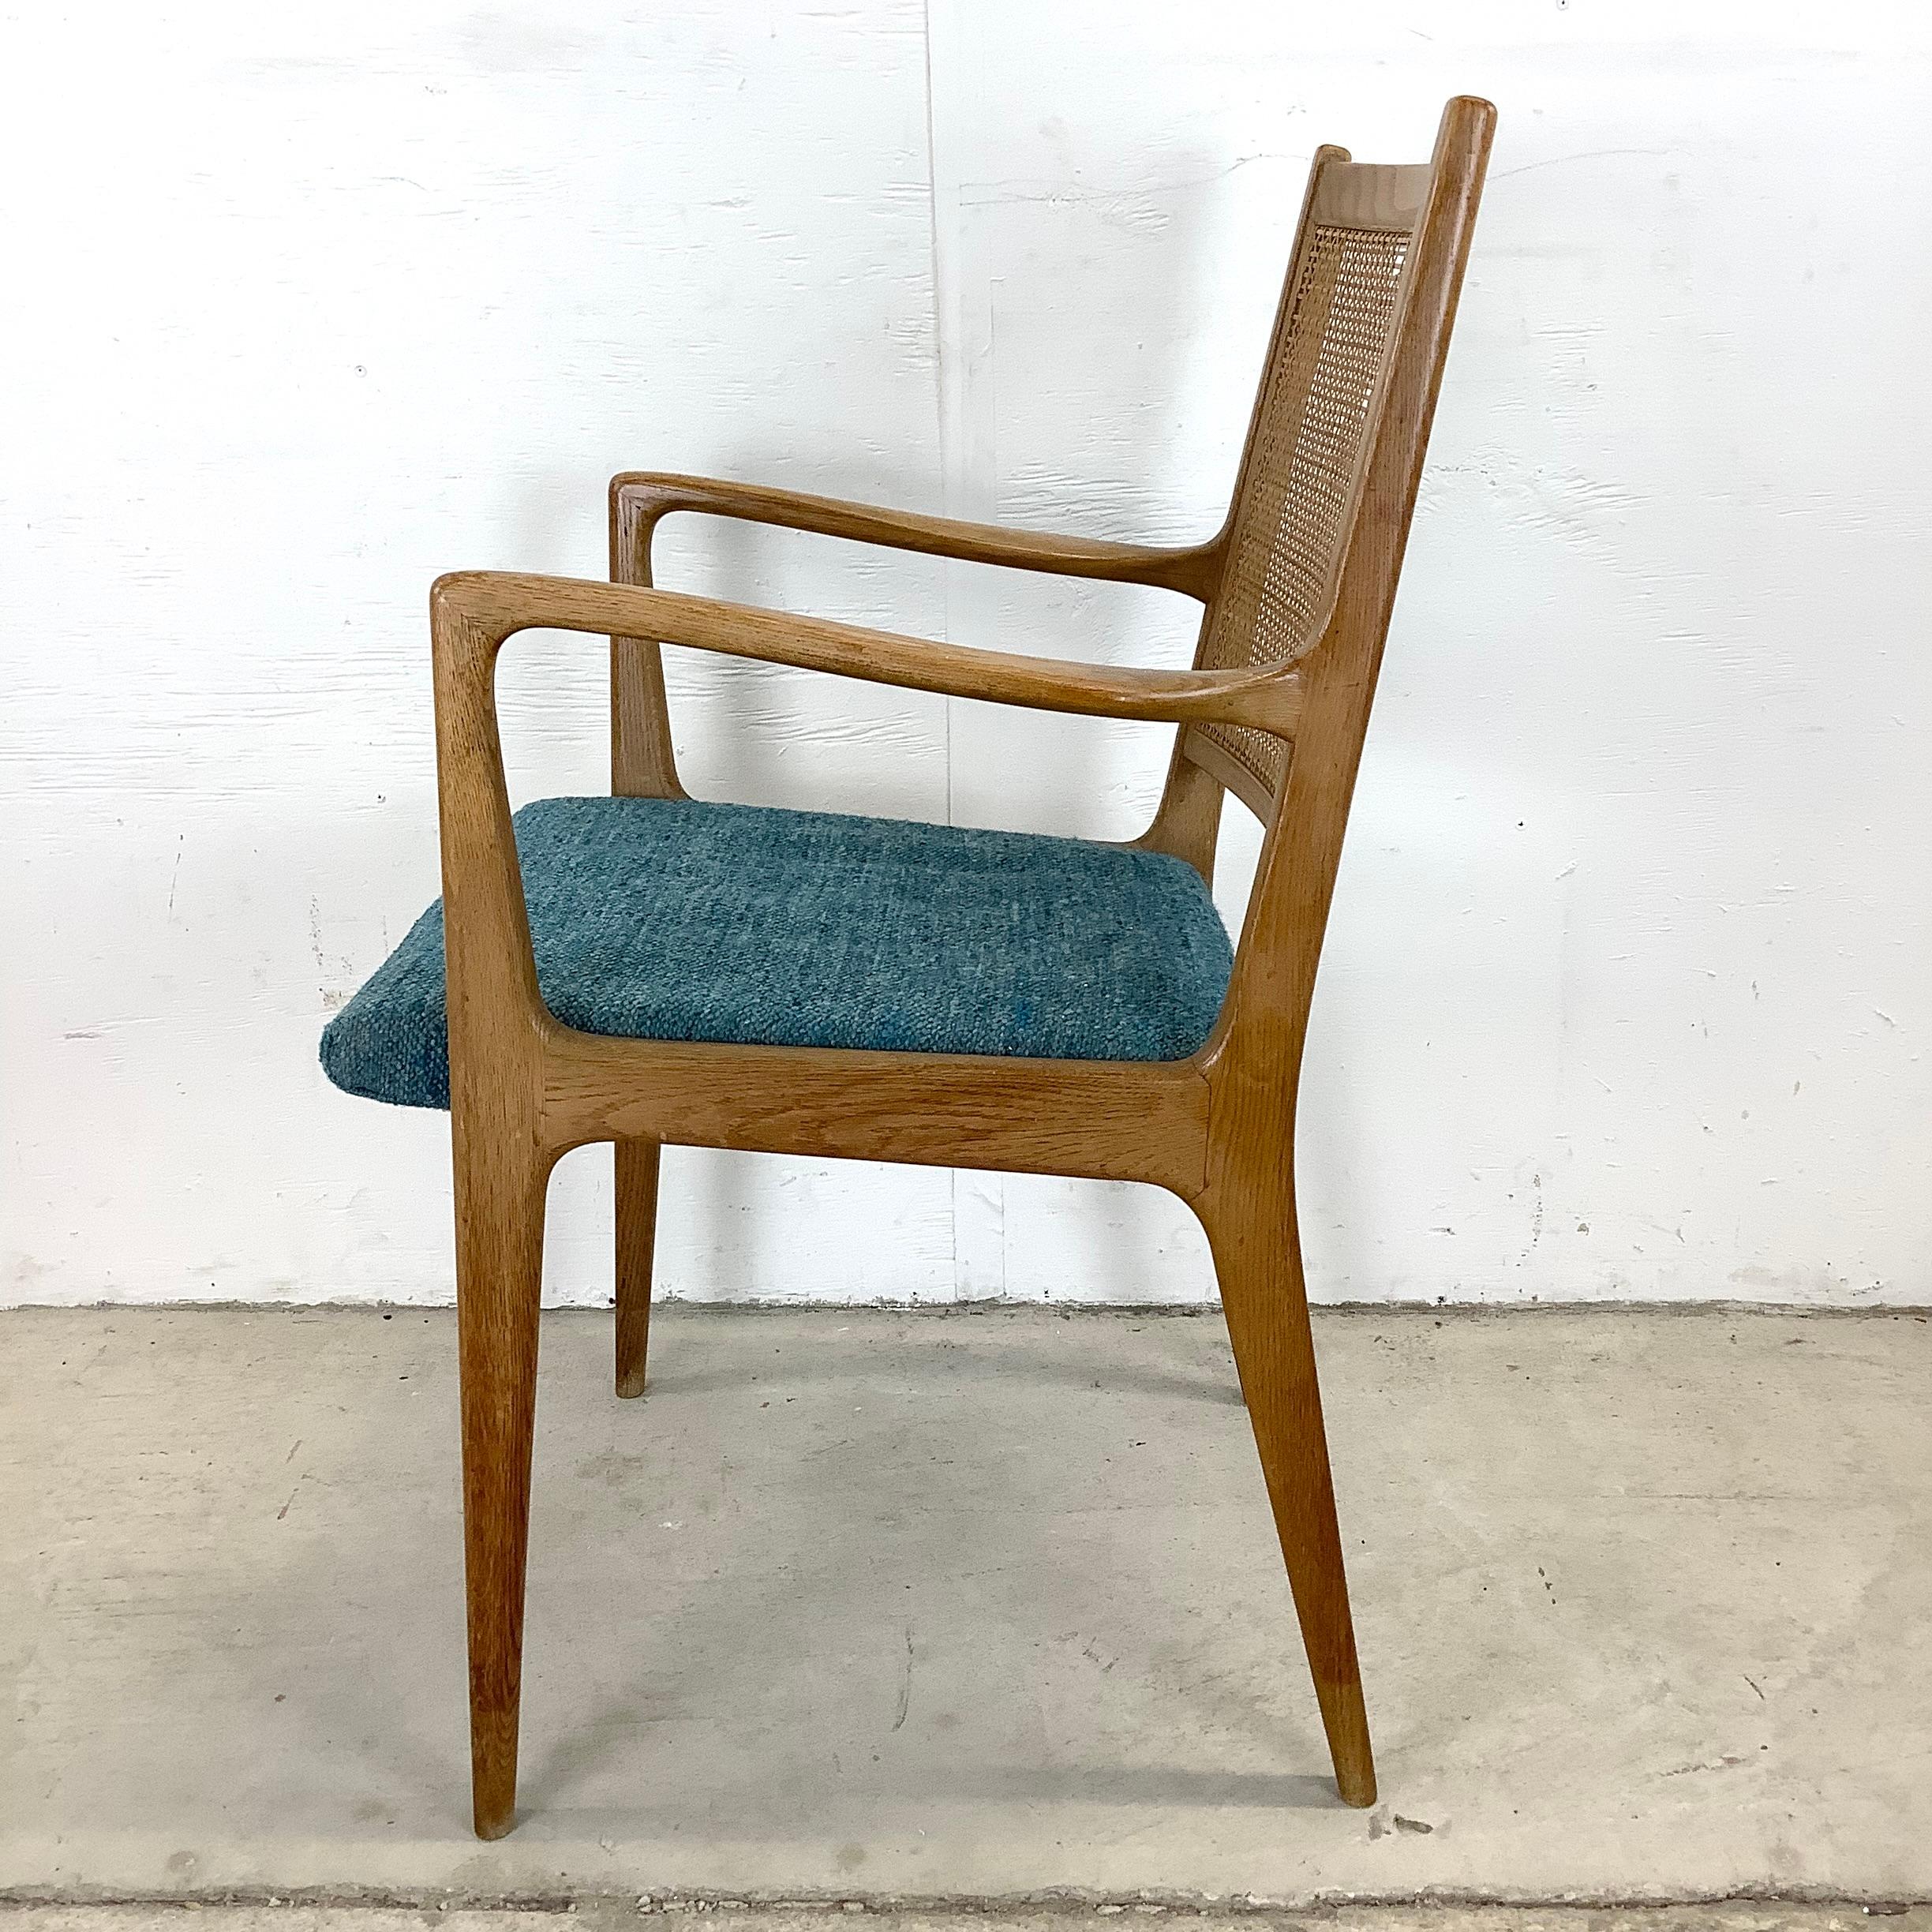 Mid-20th Century Mid-Century Cane Back Armchair With Upholstered Seat For Sale